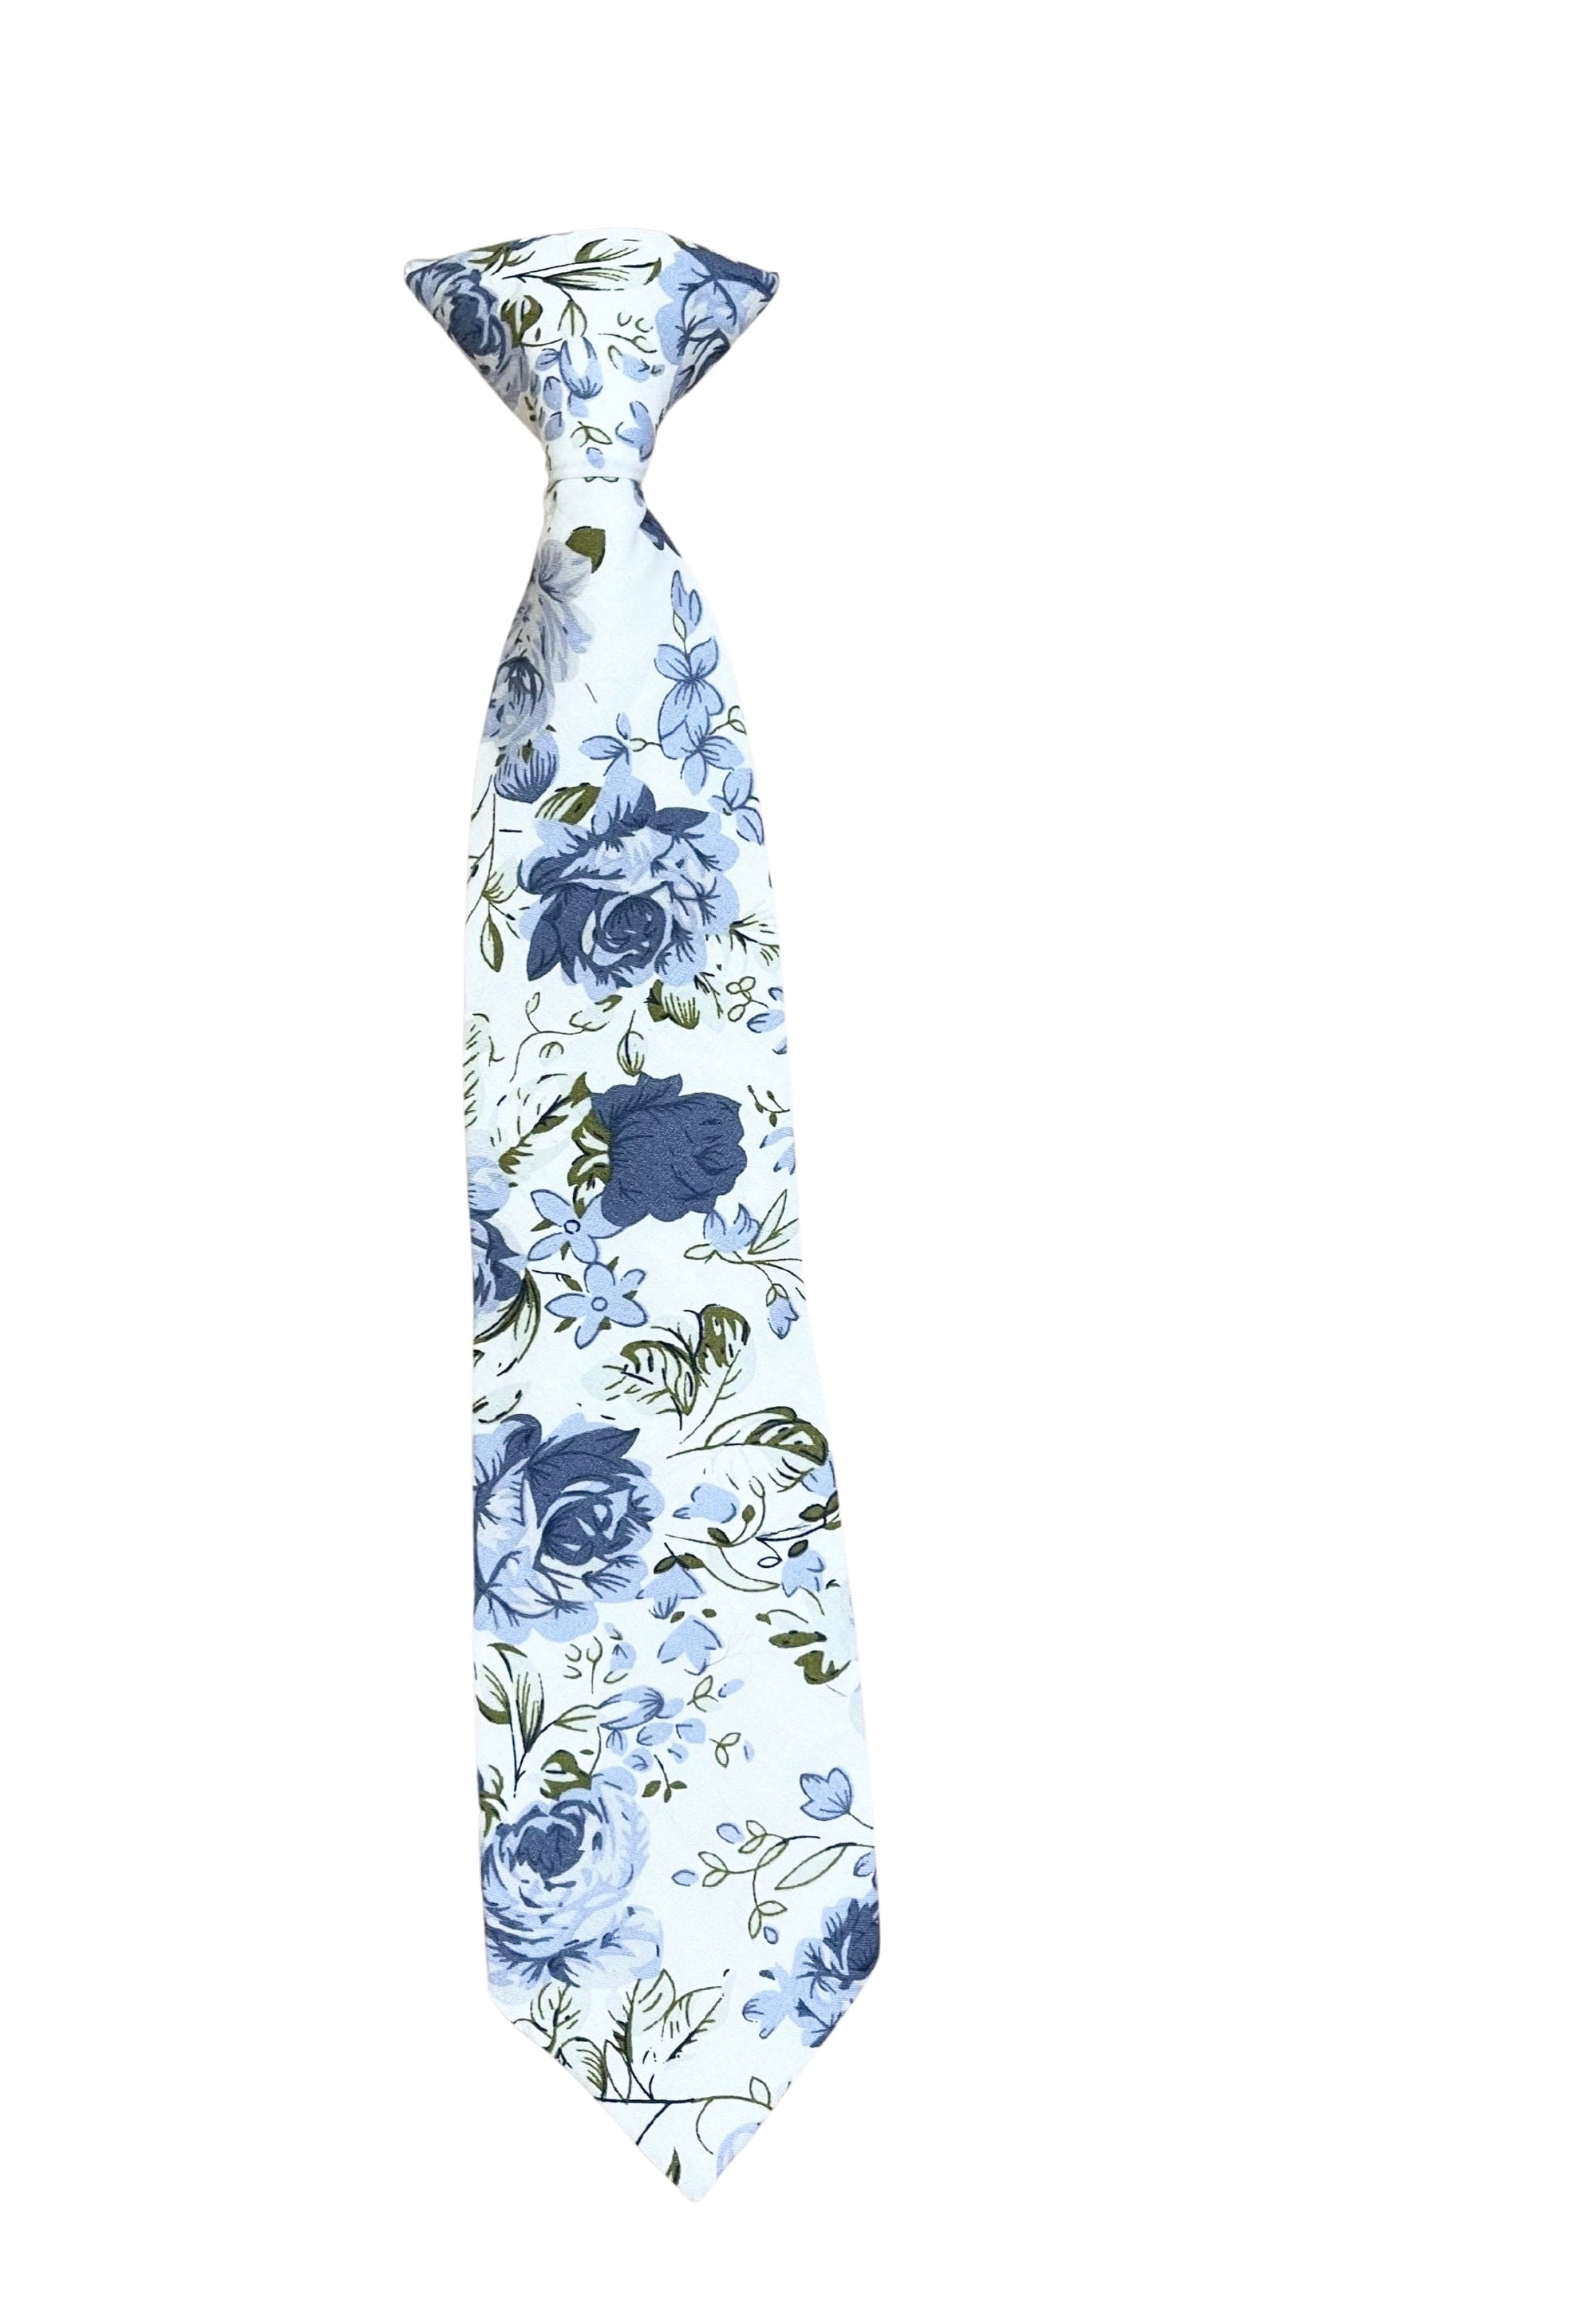 White and Blue Floral Ties for Boys Clip On Tie 2.3 Mytieshop - SAM-Your little one will look dapper as can be in this SAM Kids Floral Clip On Tie. Tie it on them before you head out for a family dinner or have them wear it to a wedding. No matter the occasion, your kiddo will be the best-dressed one there. The floral pattern is timeless and classic, making this tie a great addition to any formal outfit. The clip-on design is easy to put on and take off, so getting ready for that special event w